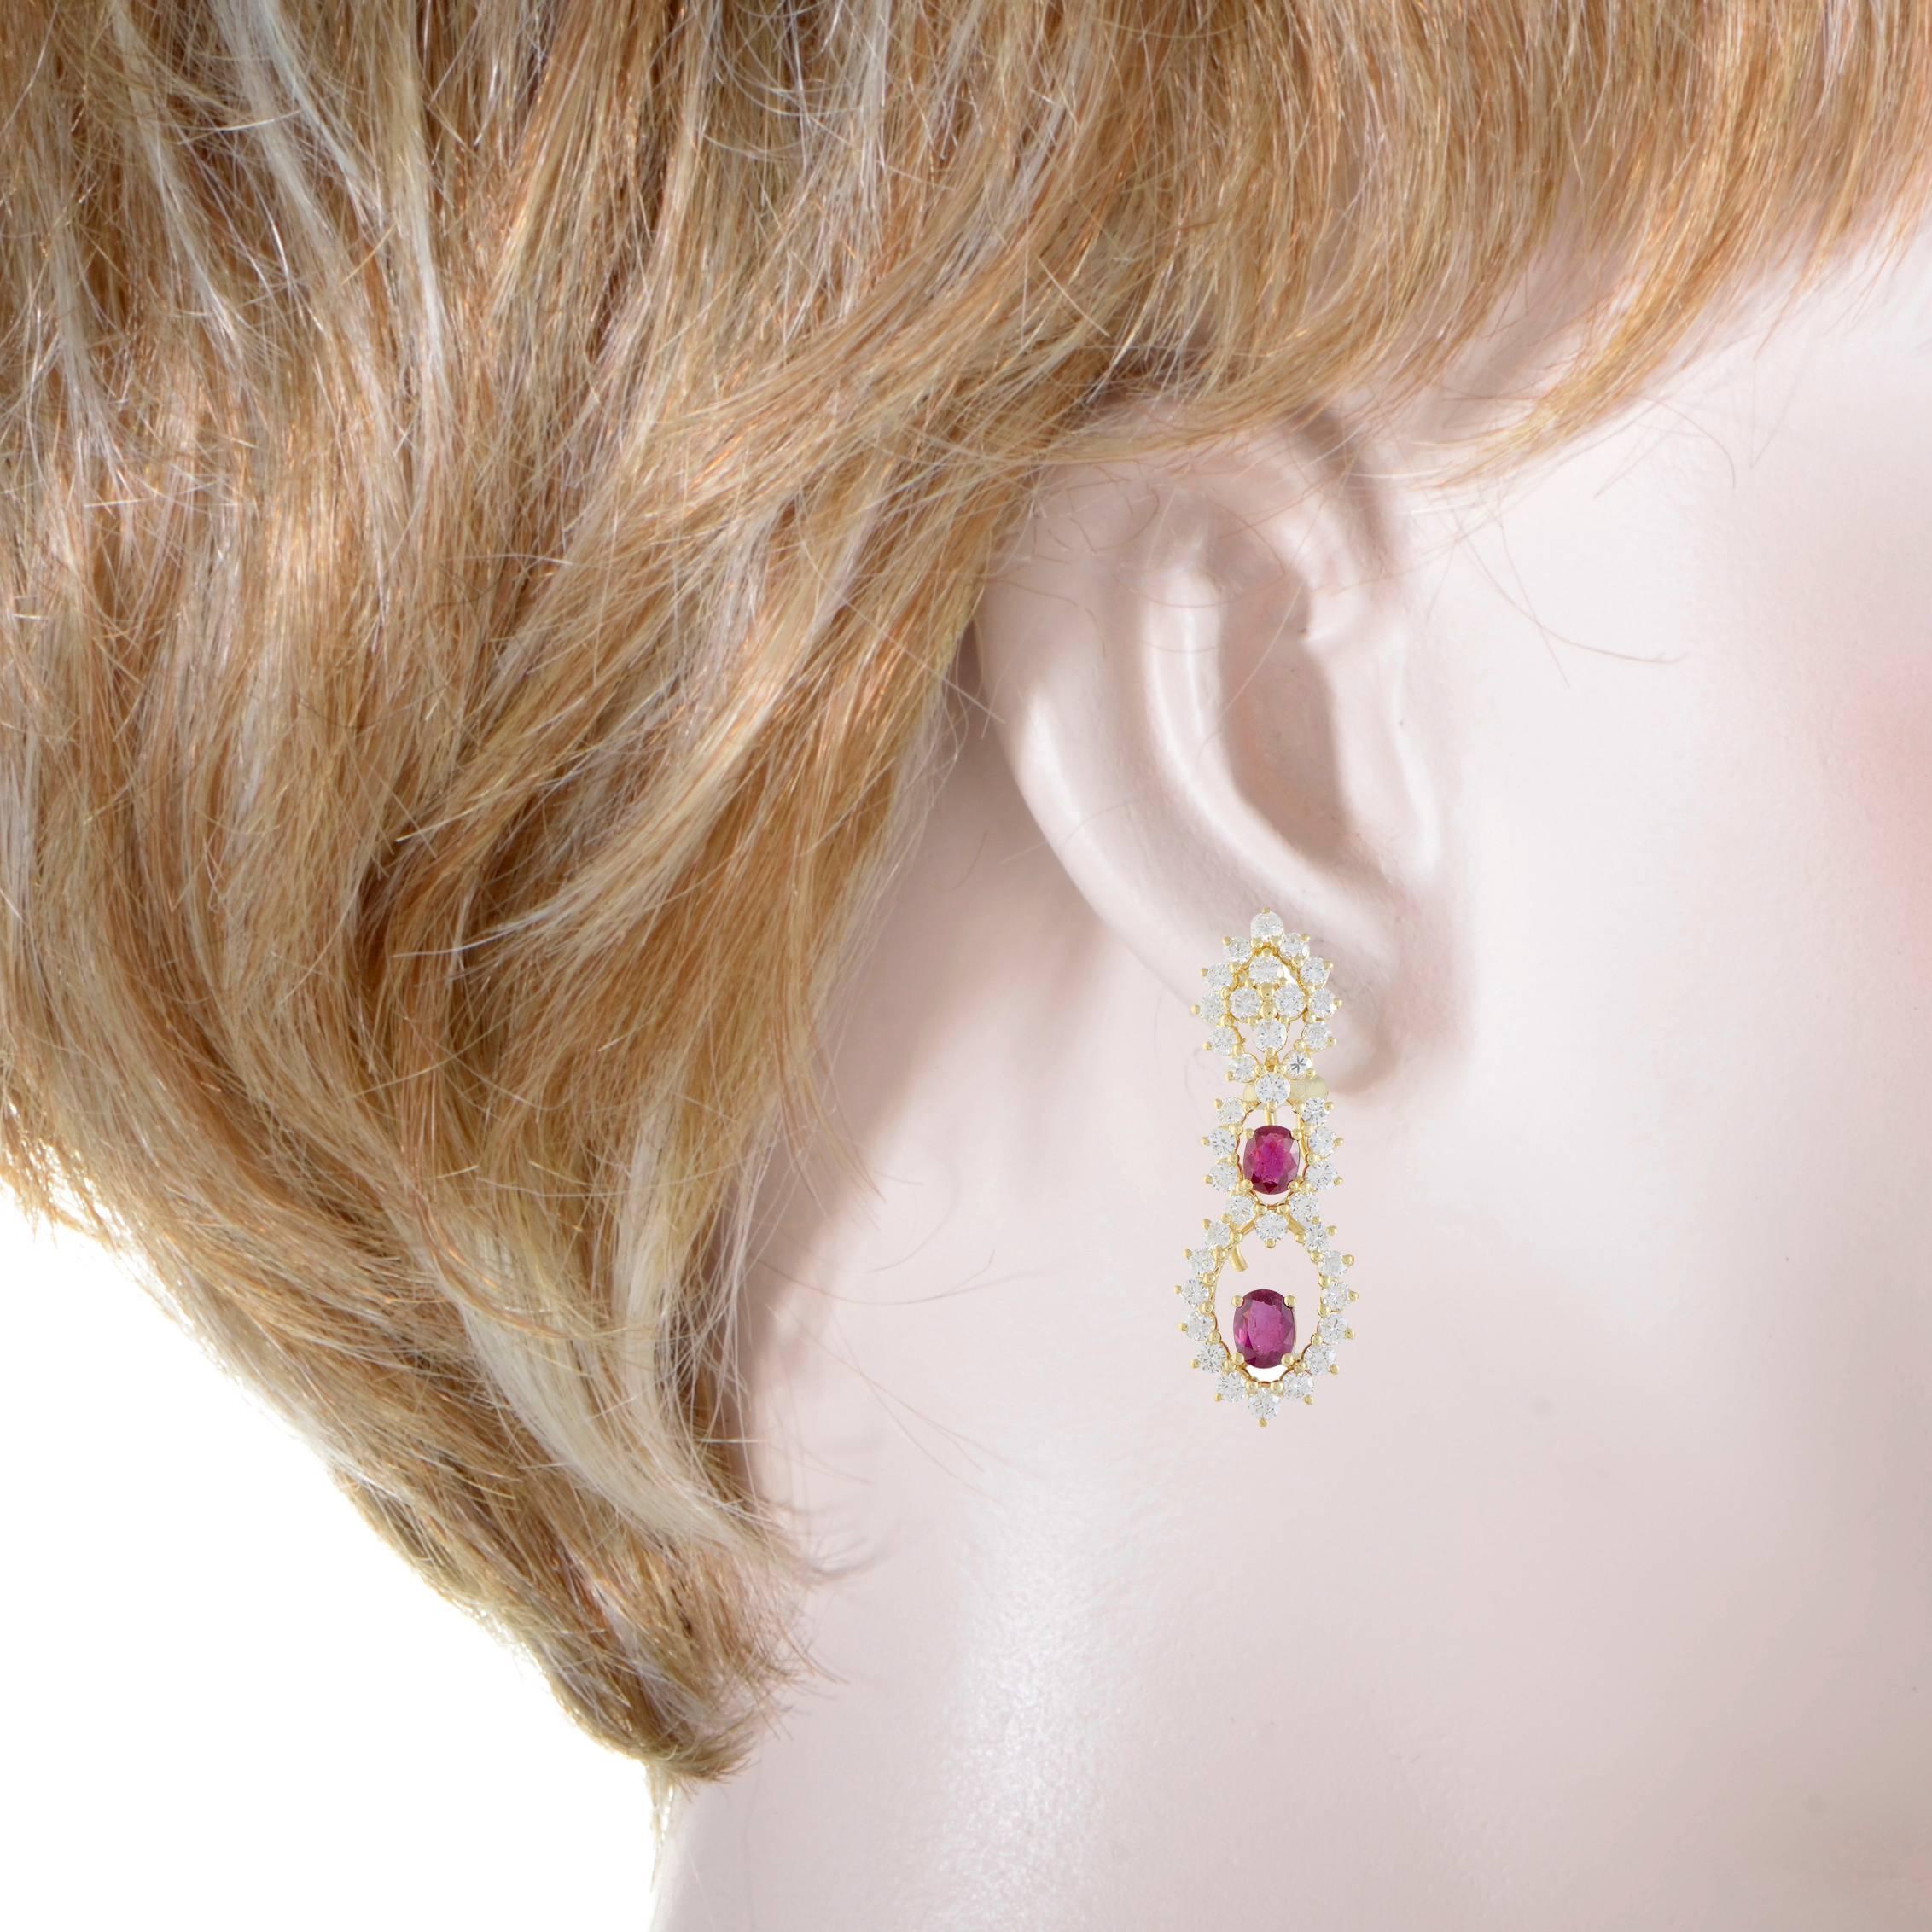 These spectacular 18K yellow gold earrings perfectly epitomize beauty and style. The fabulous earrings are embellished in a sparkling 2.30ct of diamonds and two gorgeous rubies that way a carat each. These decadent earrings will enhance the